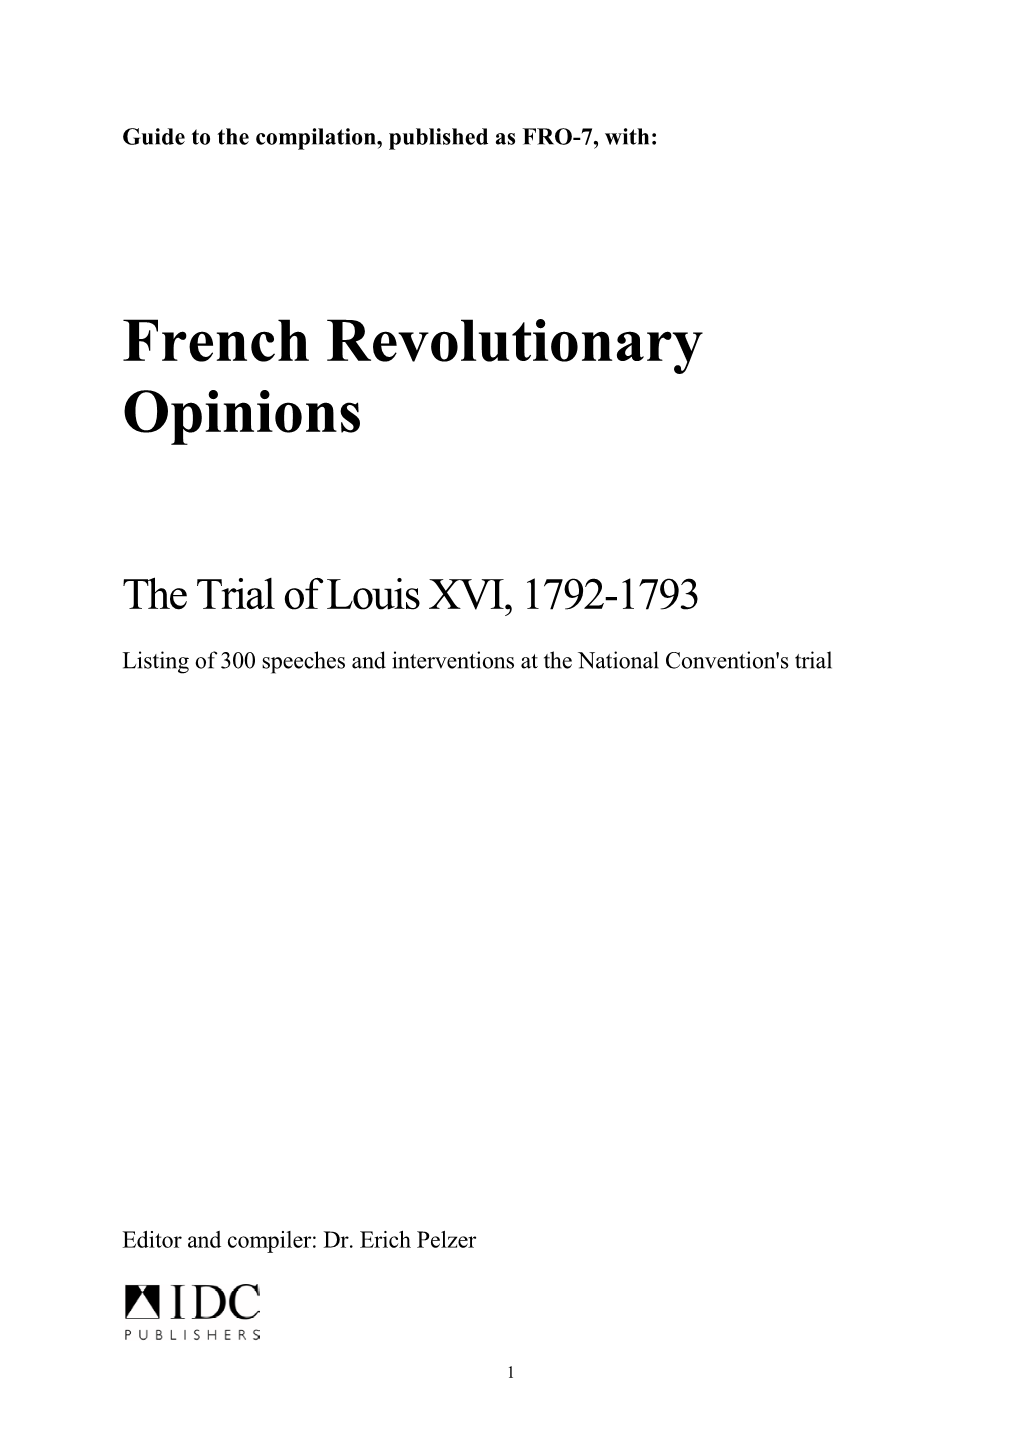 French Revolutionary Opinions